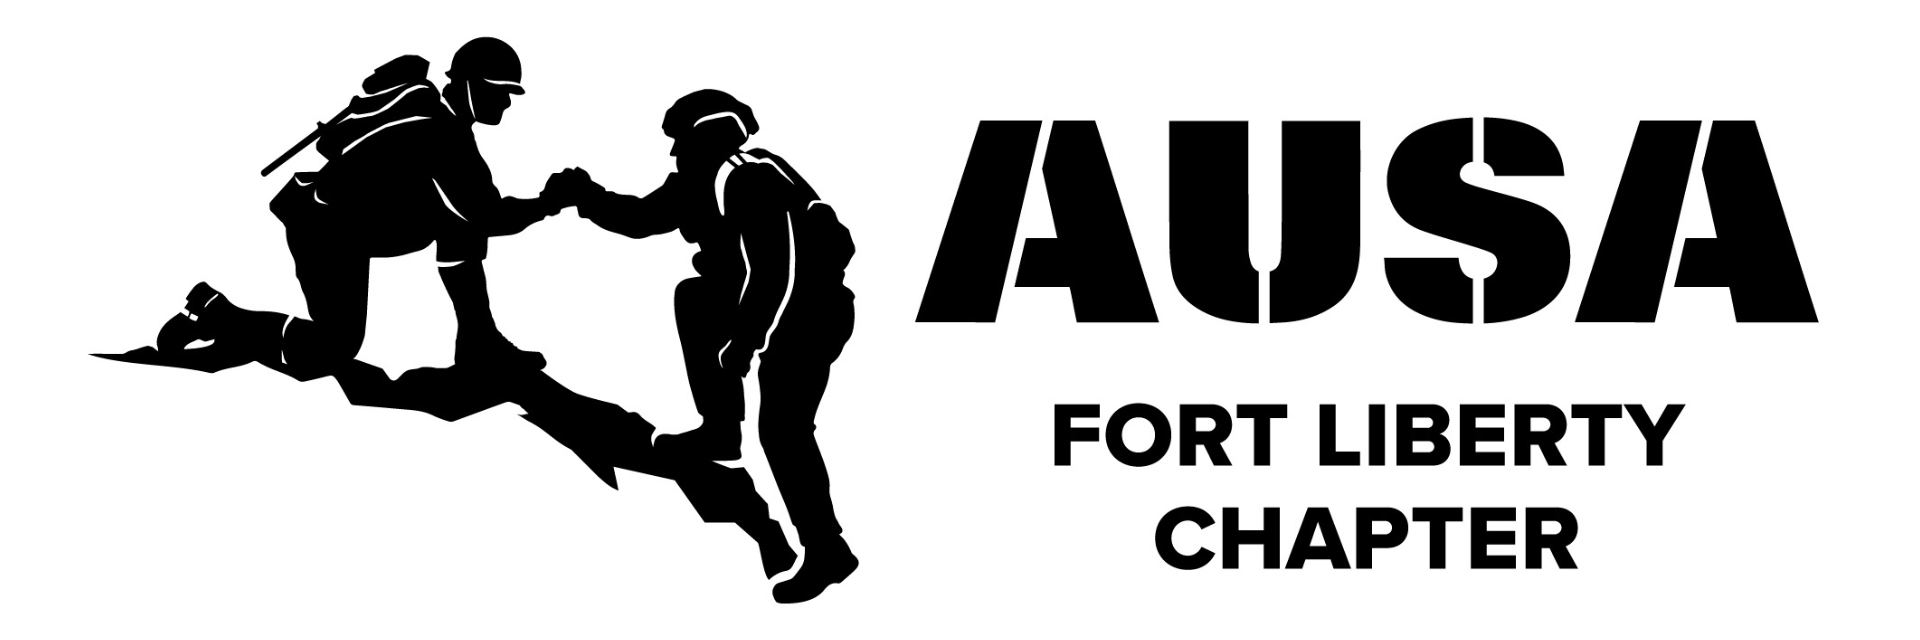 Fort Liberty Chapter AUSA